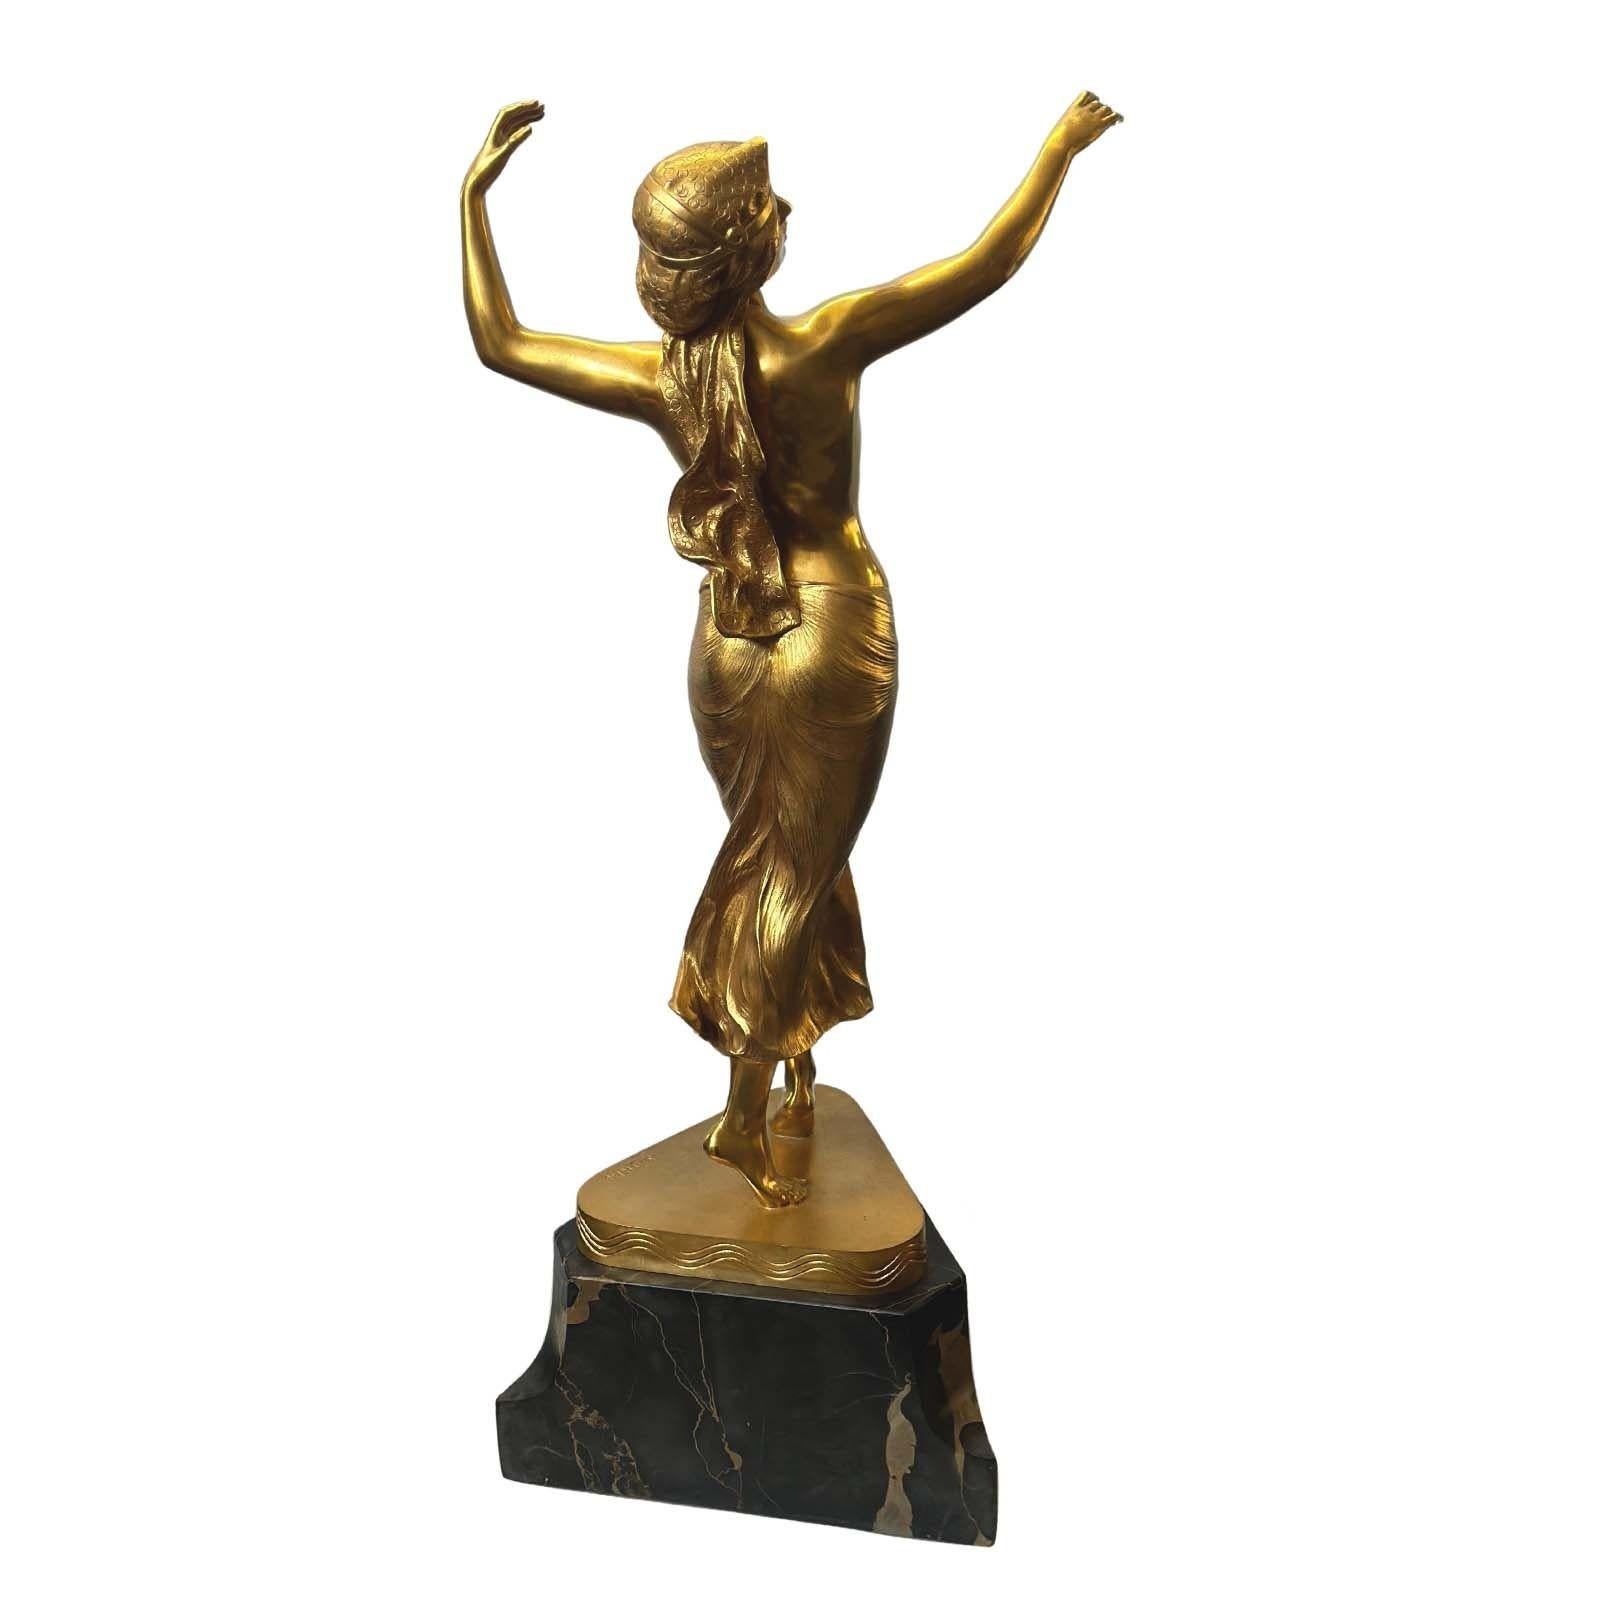 Alluring sculpture by the distinguished German artist featuring an oriental dancer woman dancing gracefully on a black Portero marble triangle base. It captures the dancer's mesmerizing movements as she gracefully stands on her tippy toes, embodying